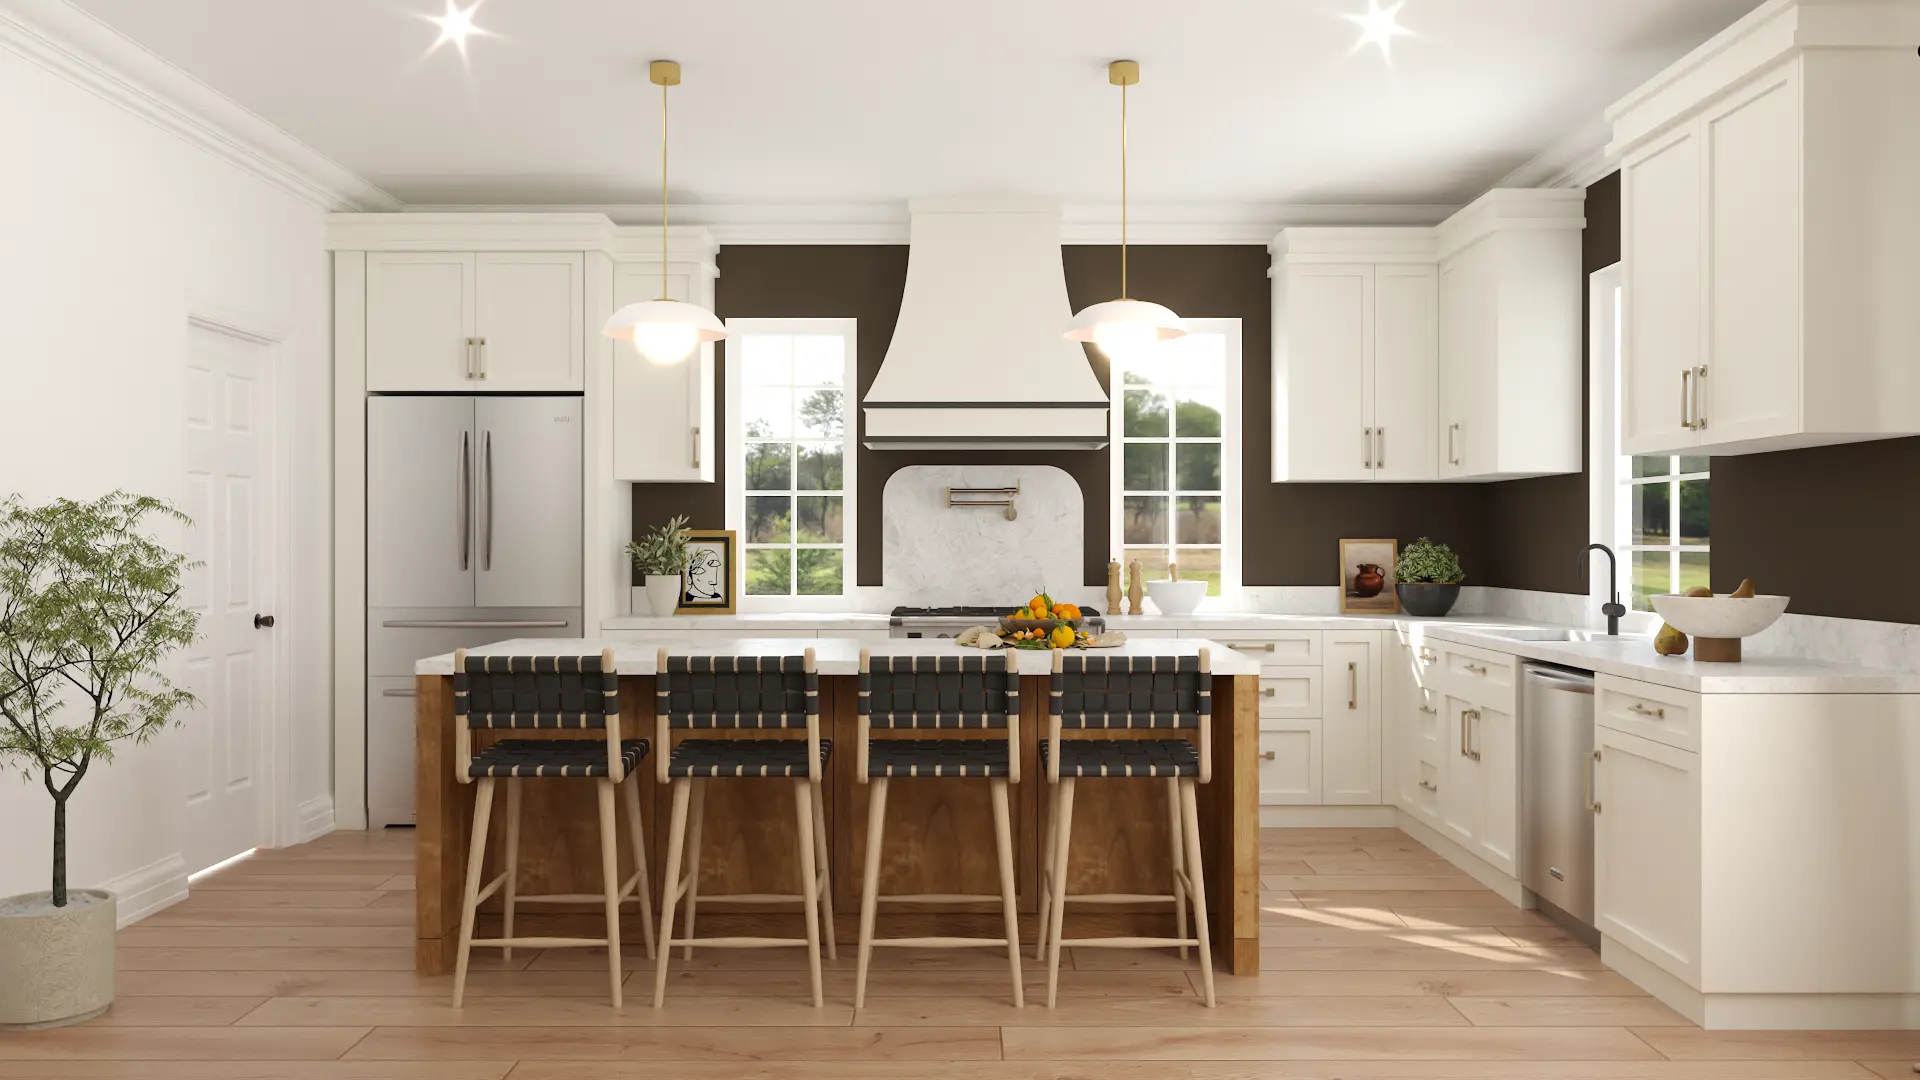 Classic white kitchen enhanced with black countertops and modern fixtures, achieving a timeless and inviting atmosphere.